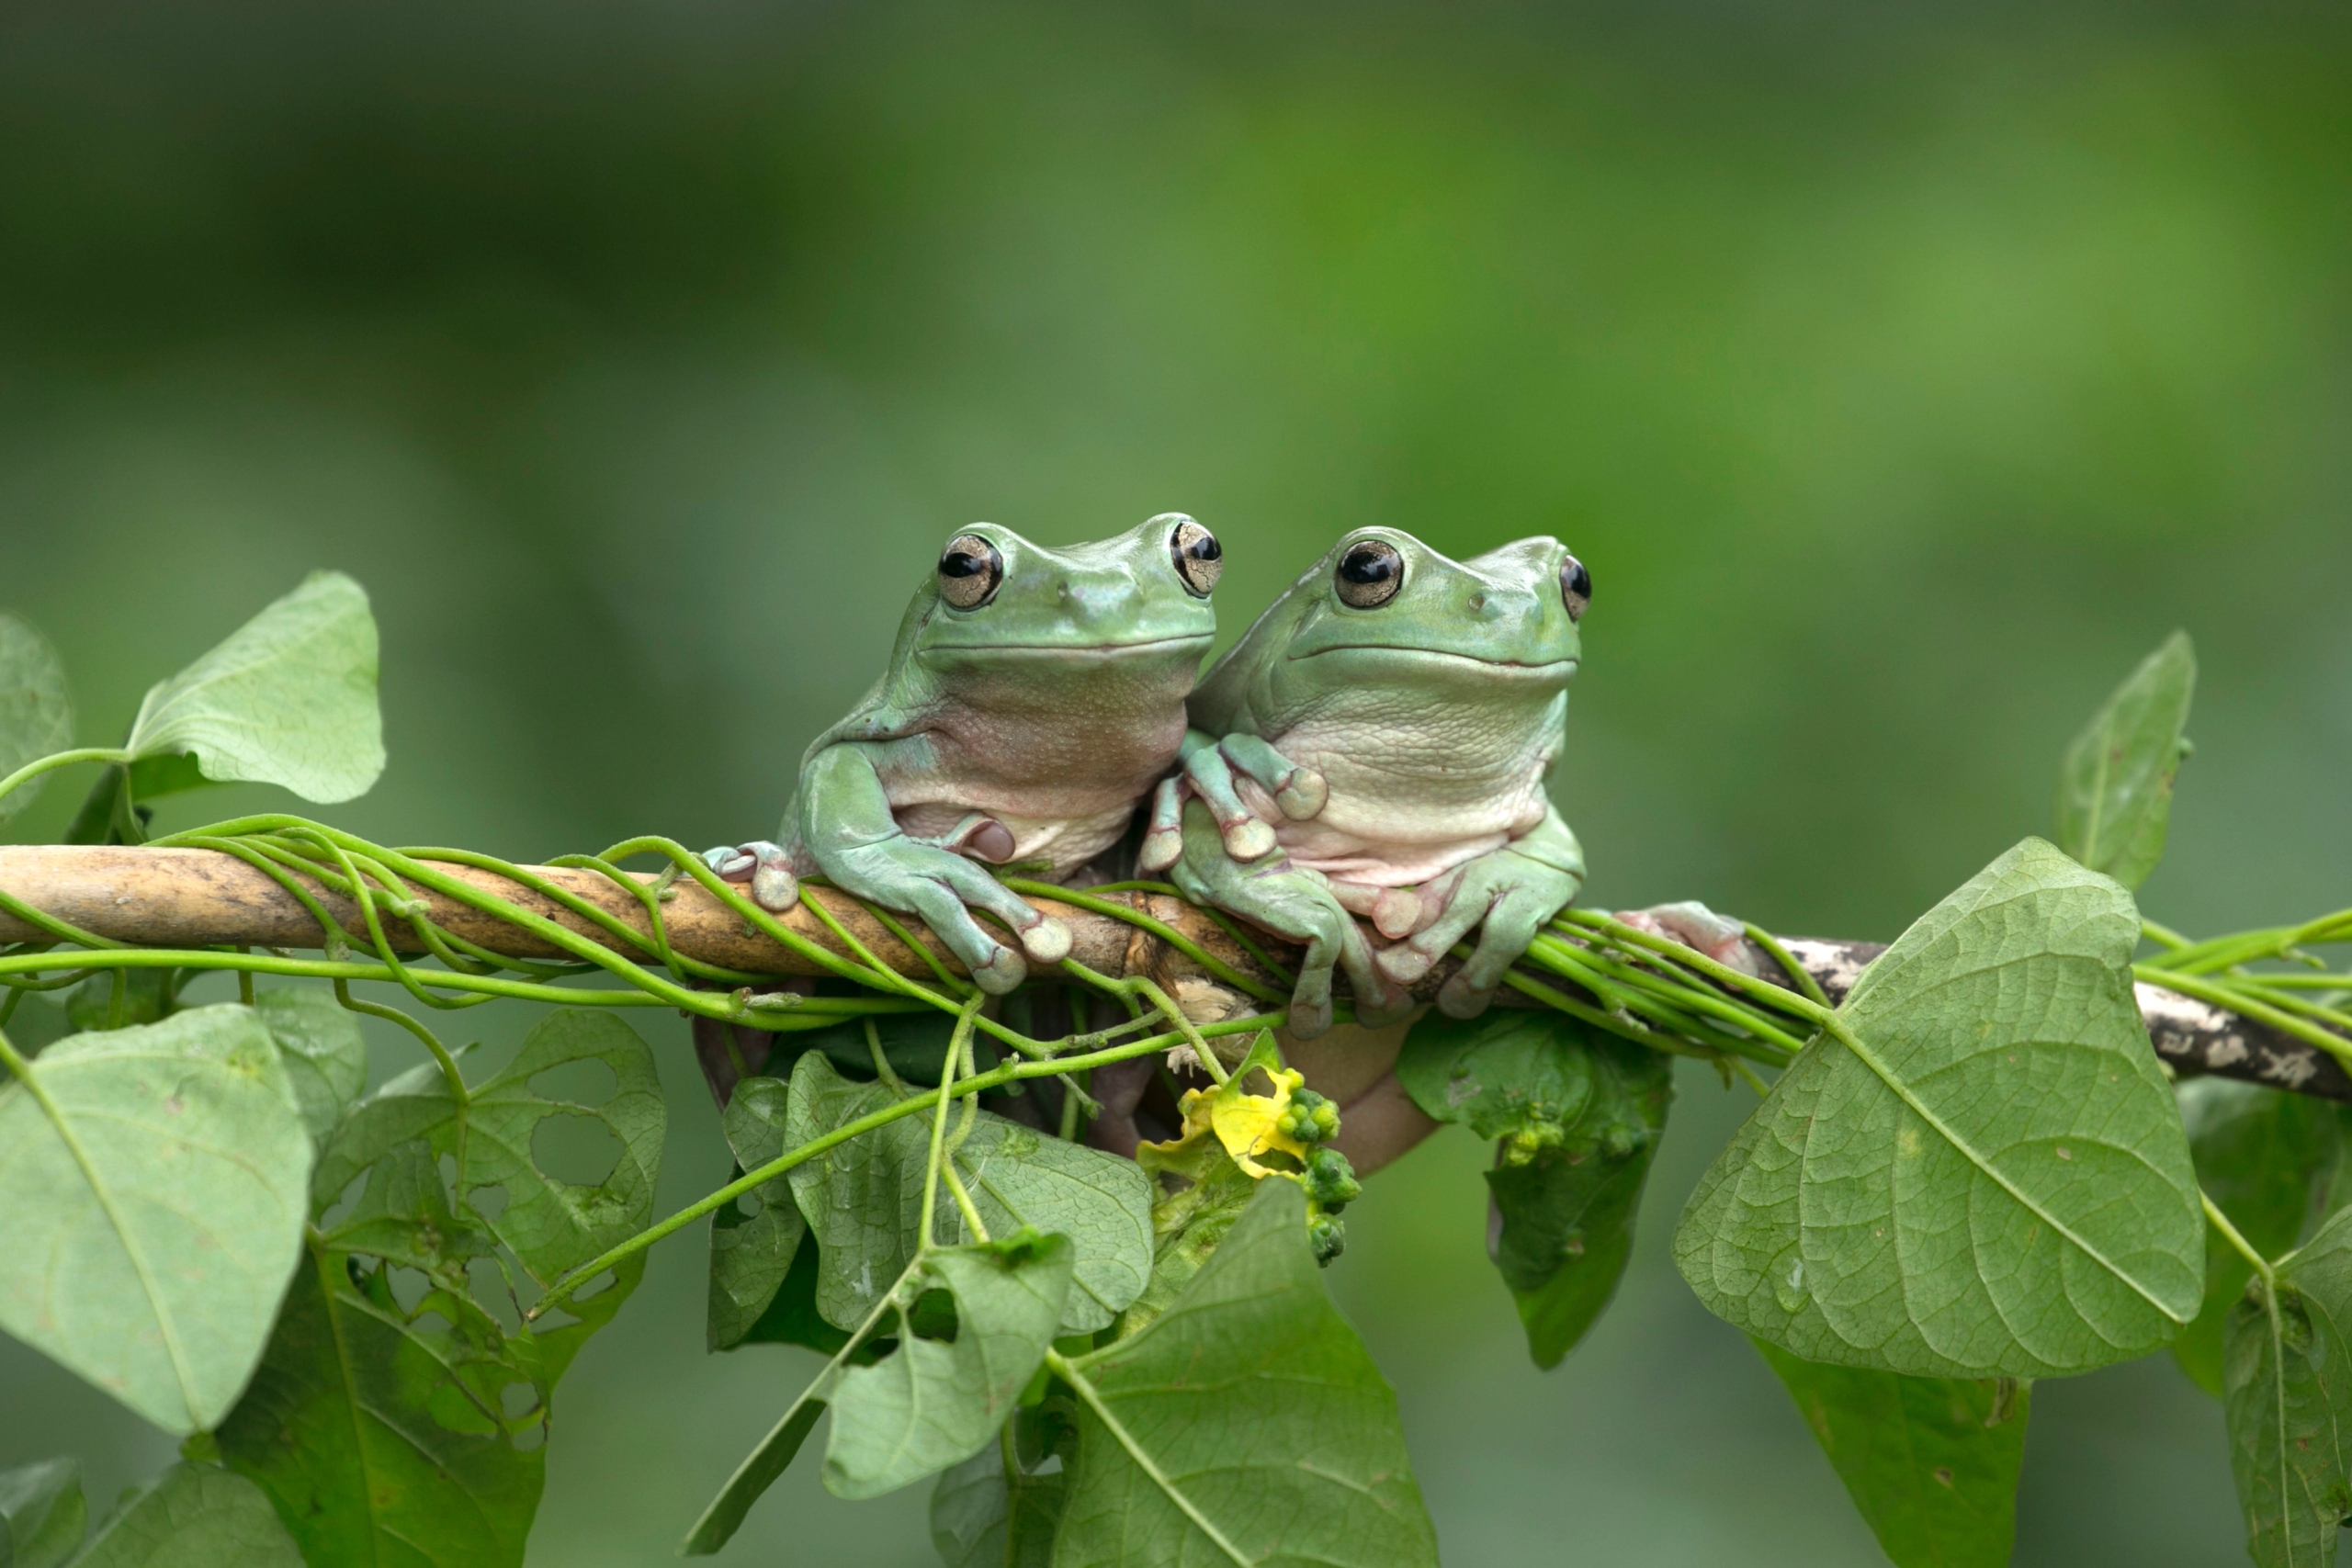 Two small green frogs sit side by side on a leafy branch